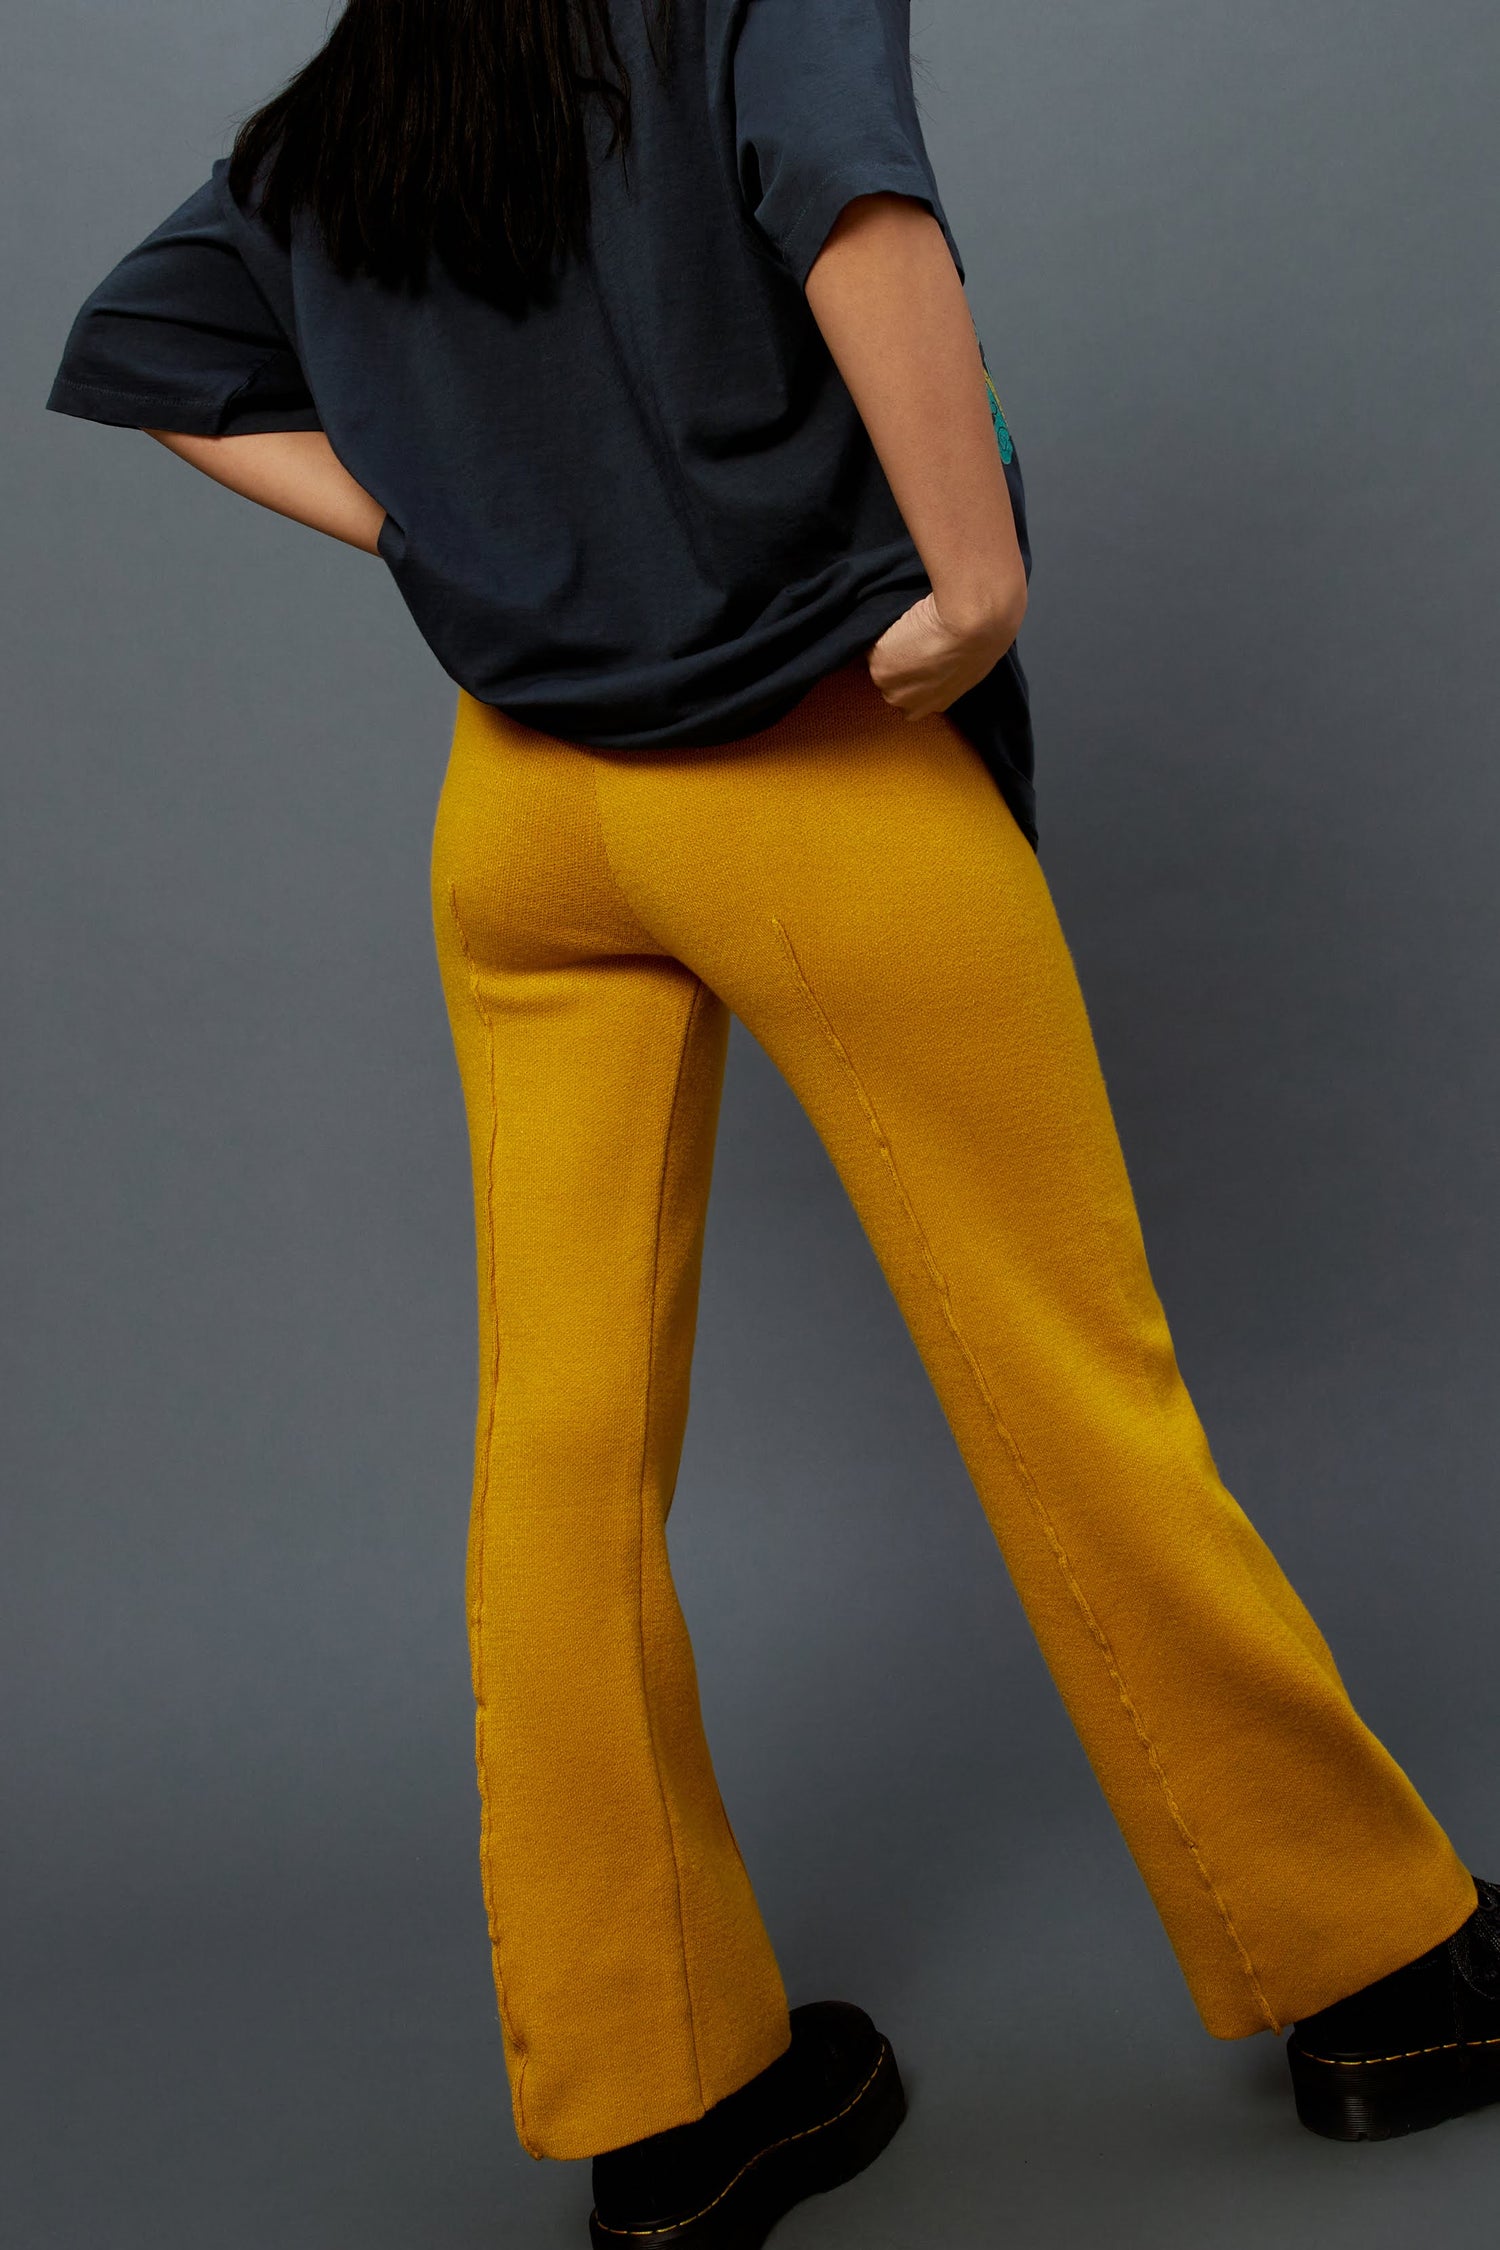 Knit Pintuck Pant in Gold